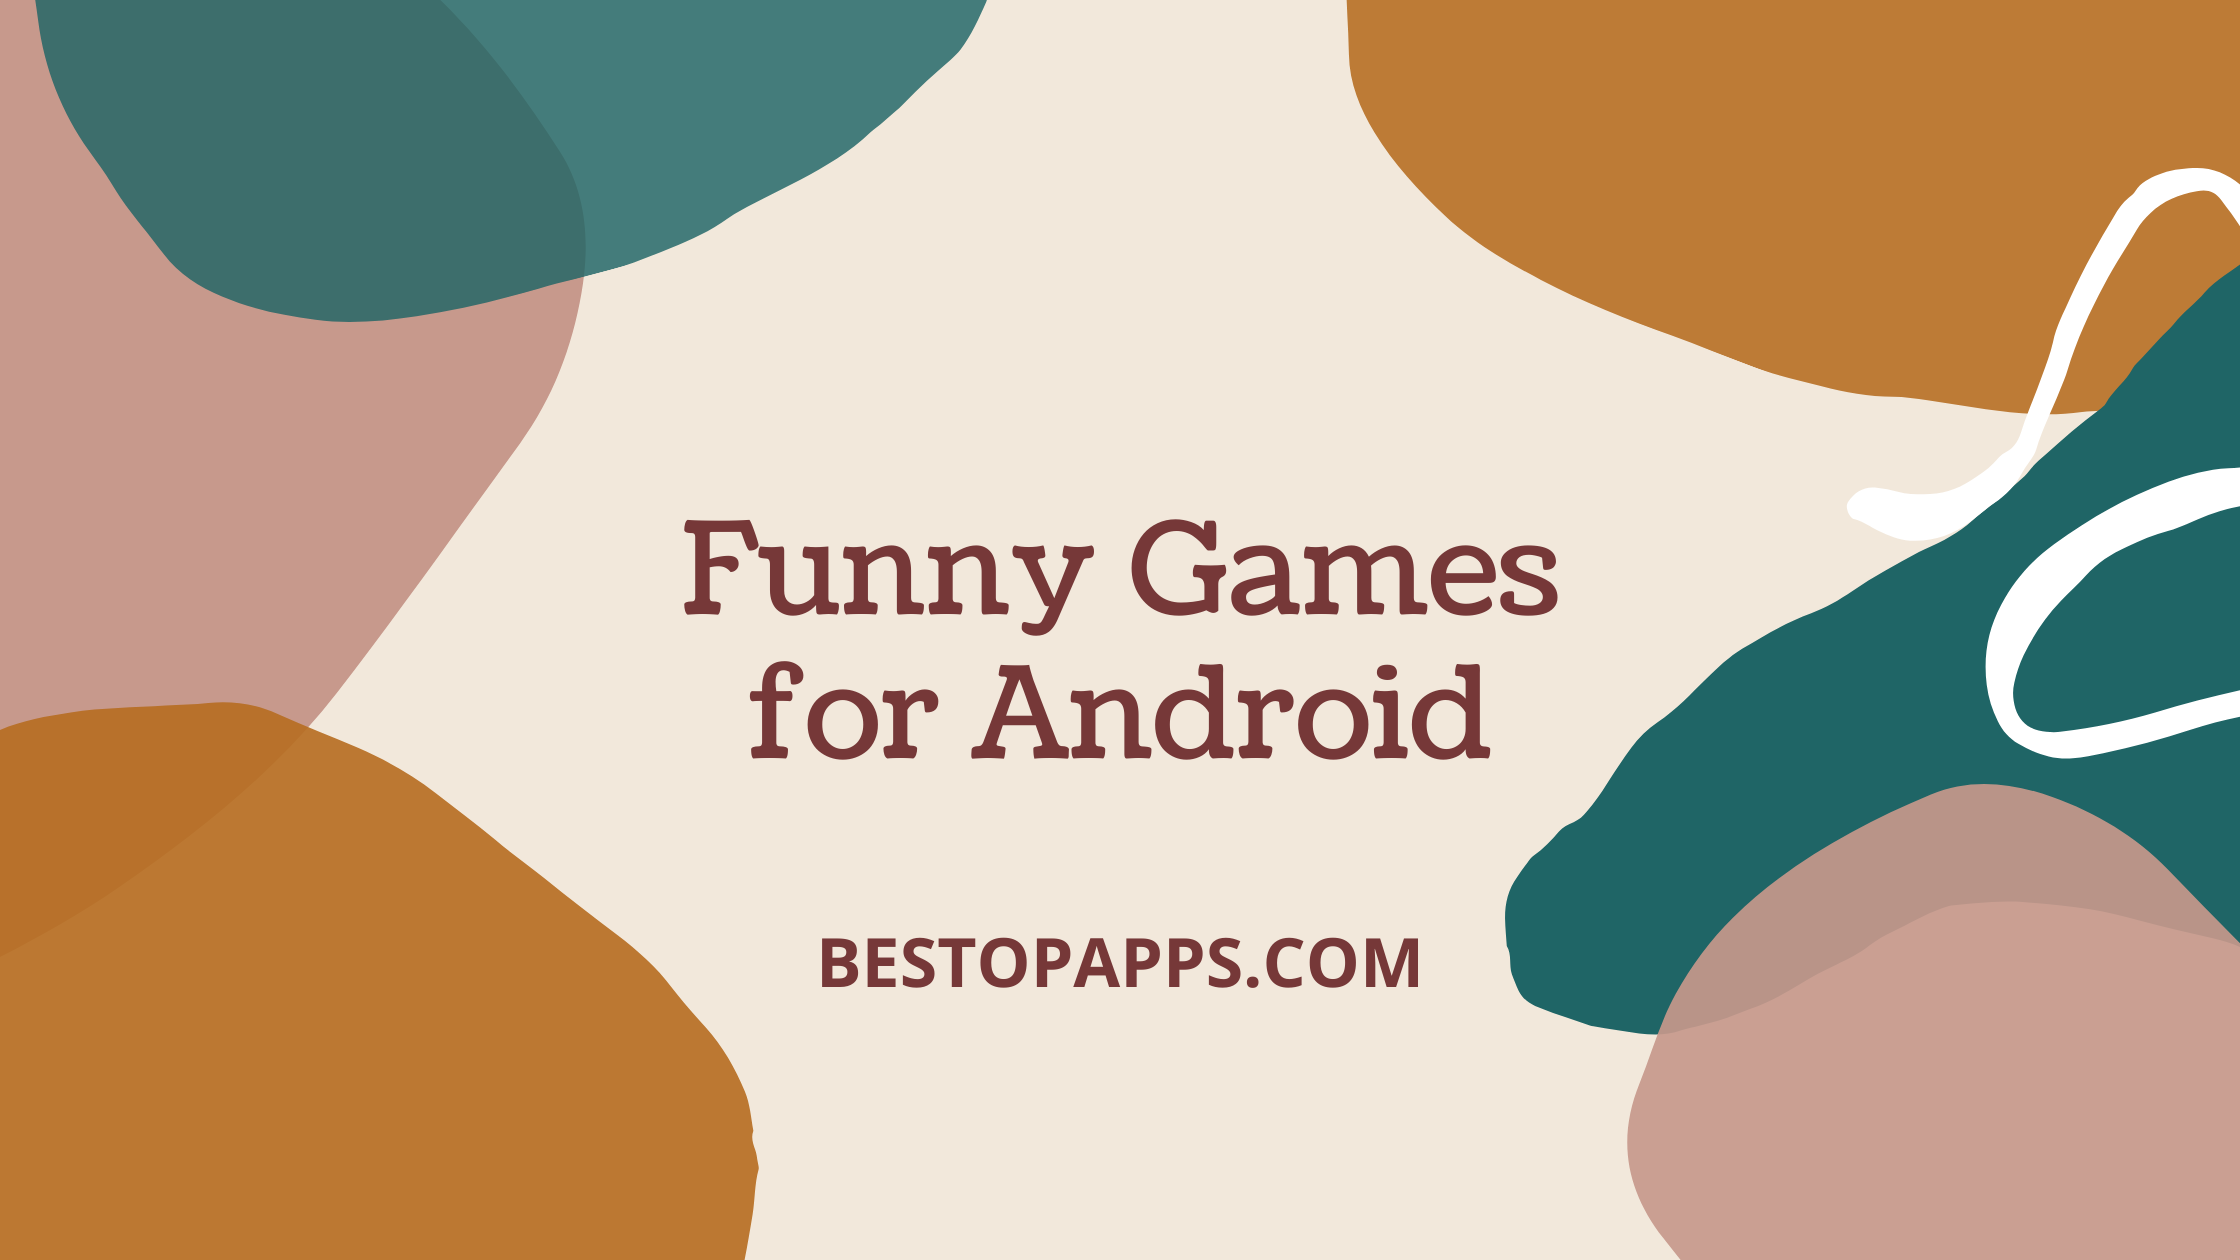 Funny Games for Android